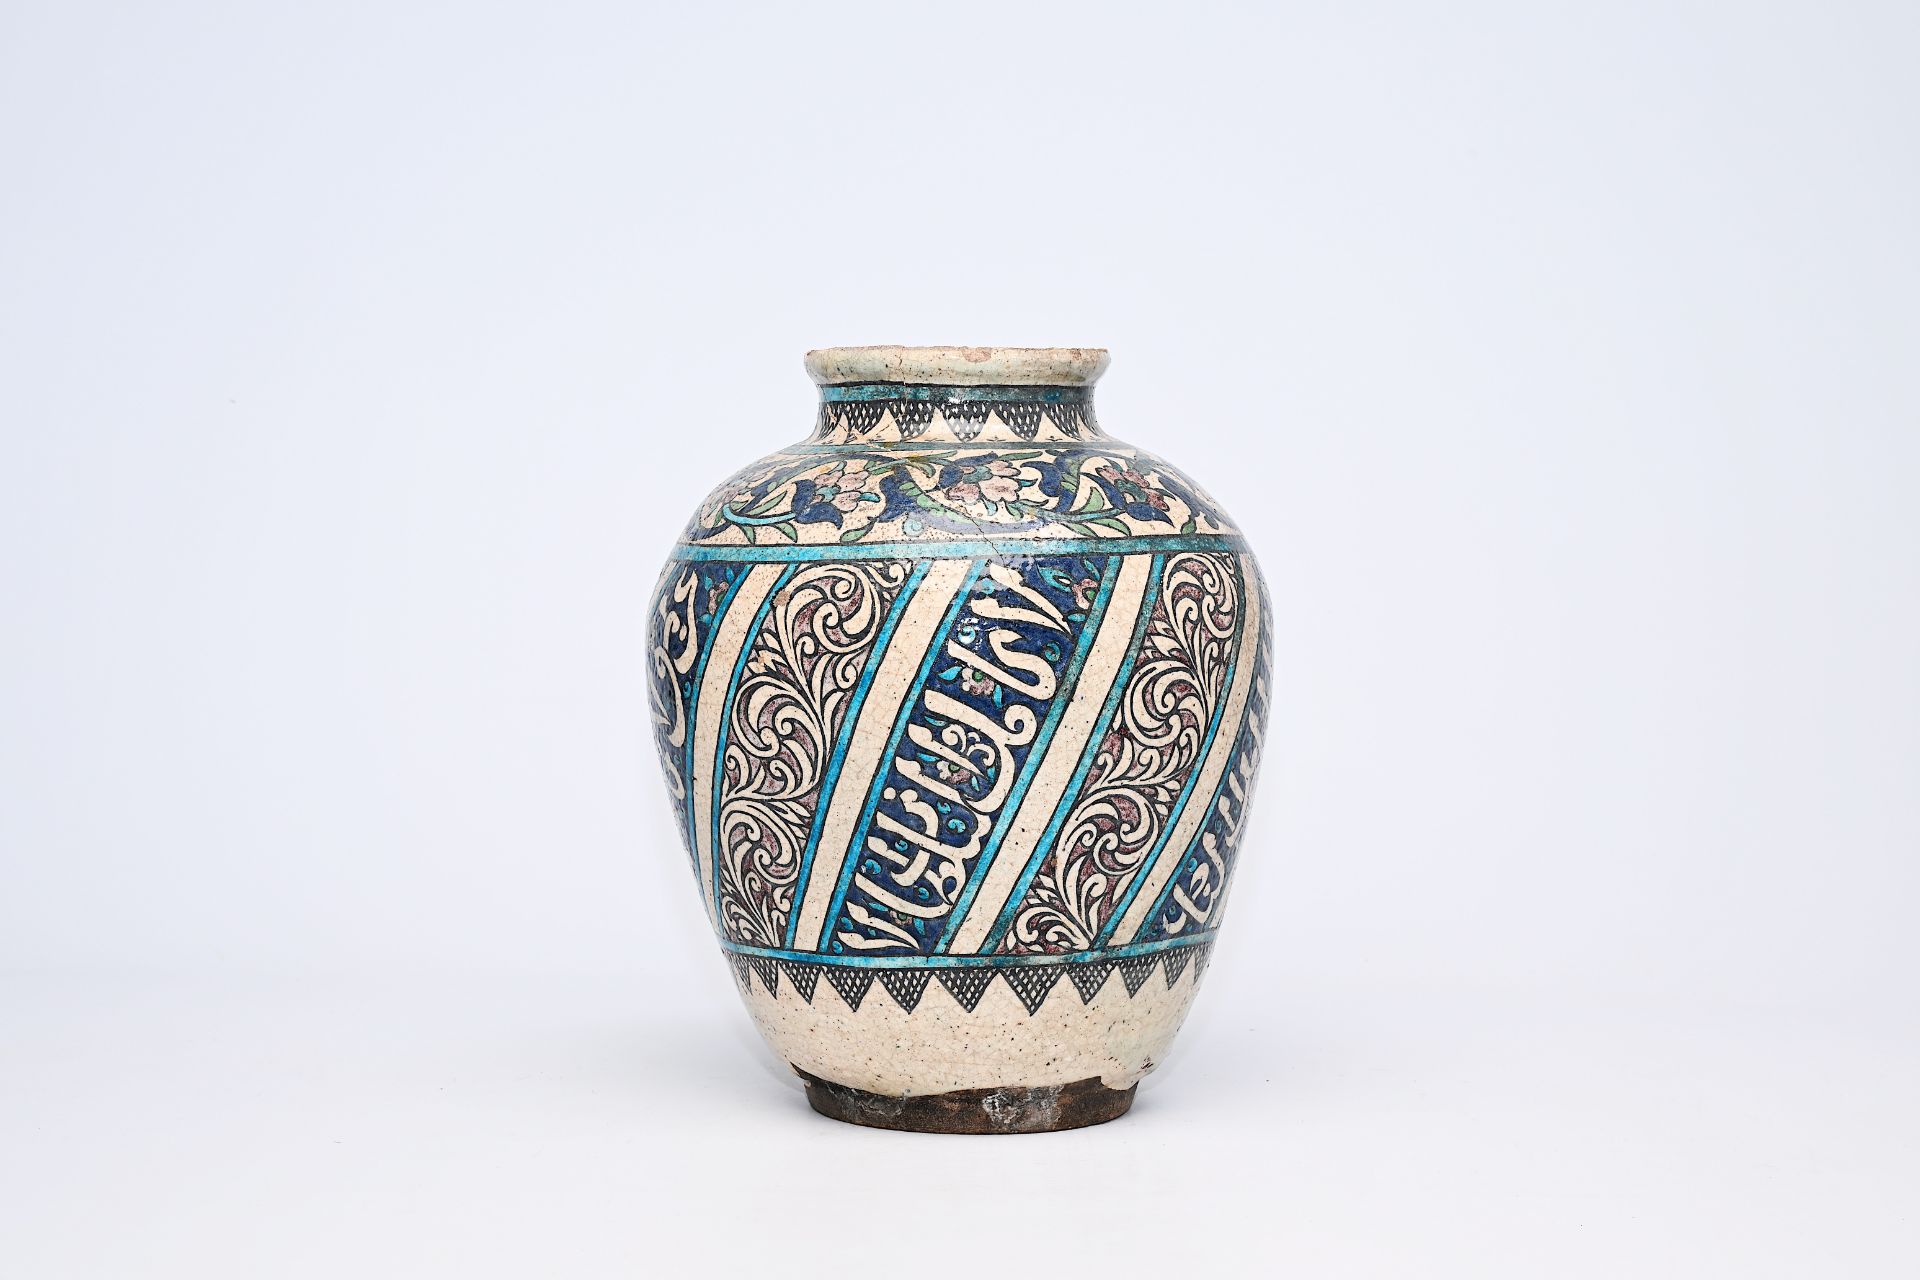 A polychrome pottery jar with floral and calligraphic design, Iran, 19th C. - Image 2 of 9